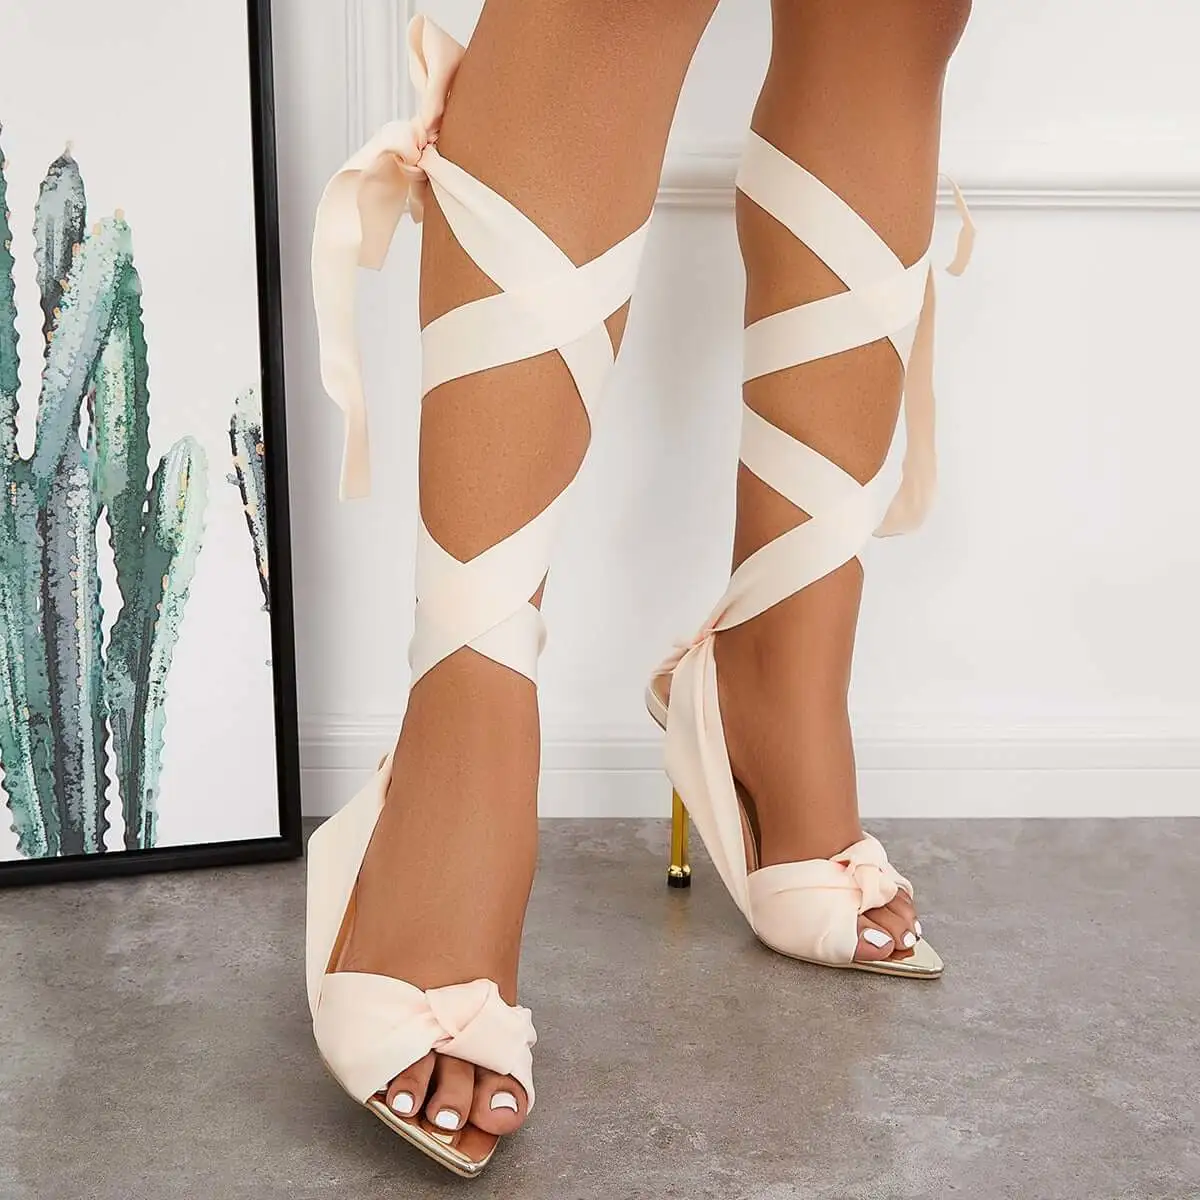 Ribbon Lace Up Ankle Strap Stiletto Sandals Dress High Heels